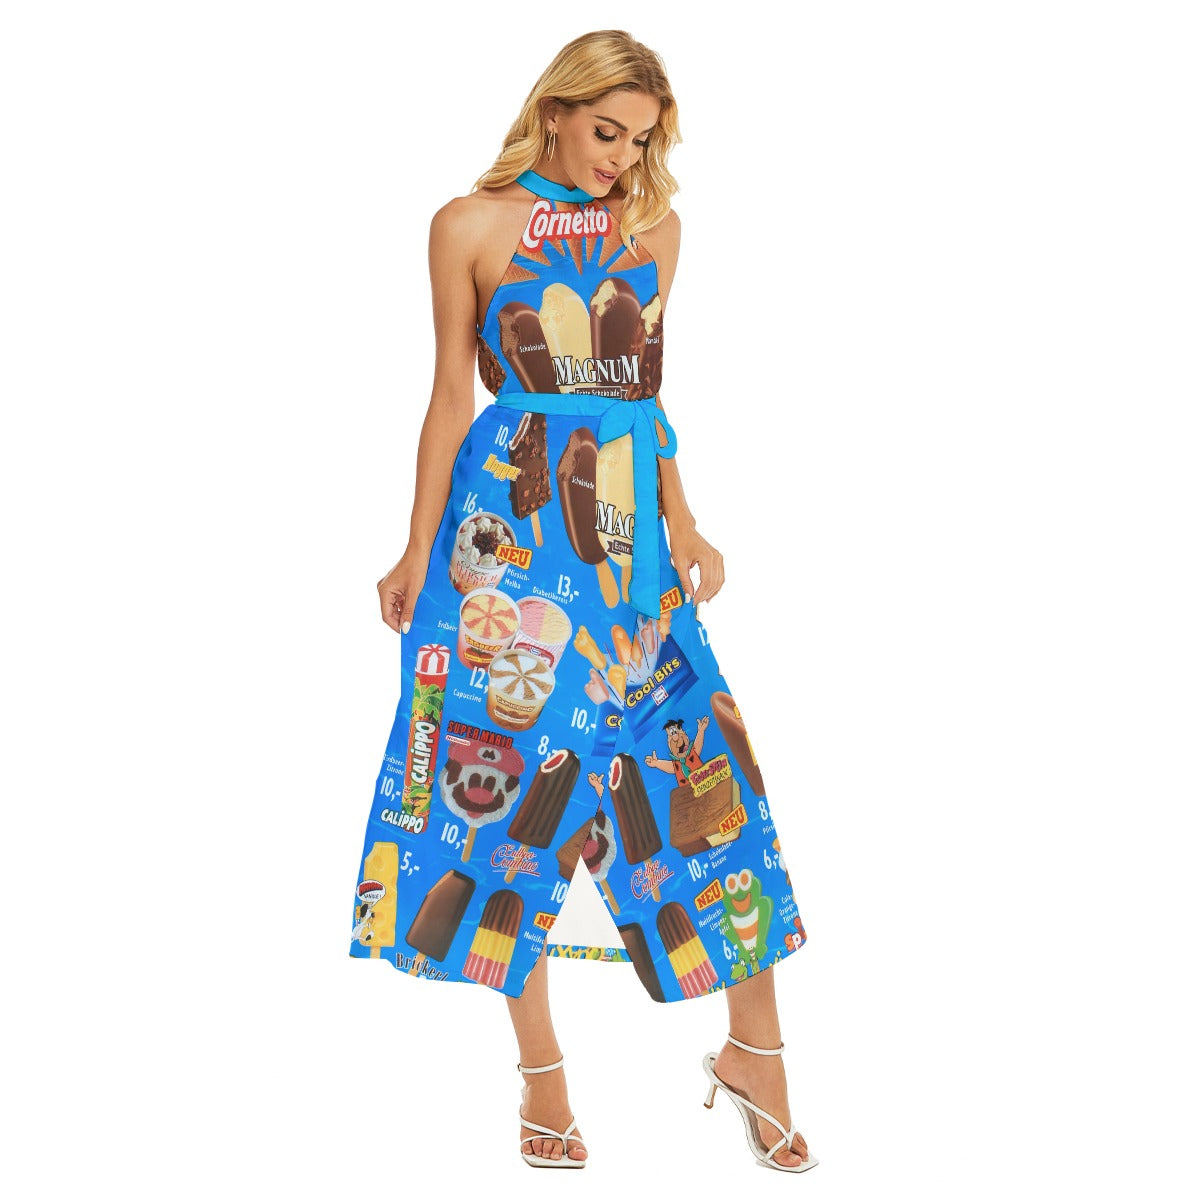 Fun and playful ice cream print dress perfect for summer outings.